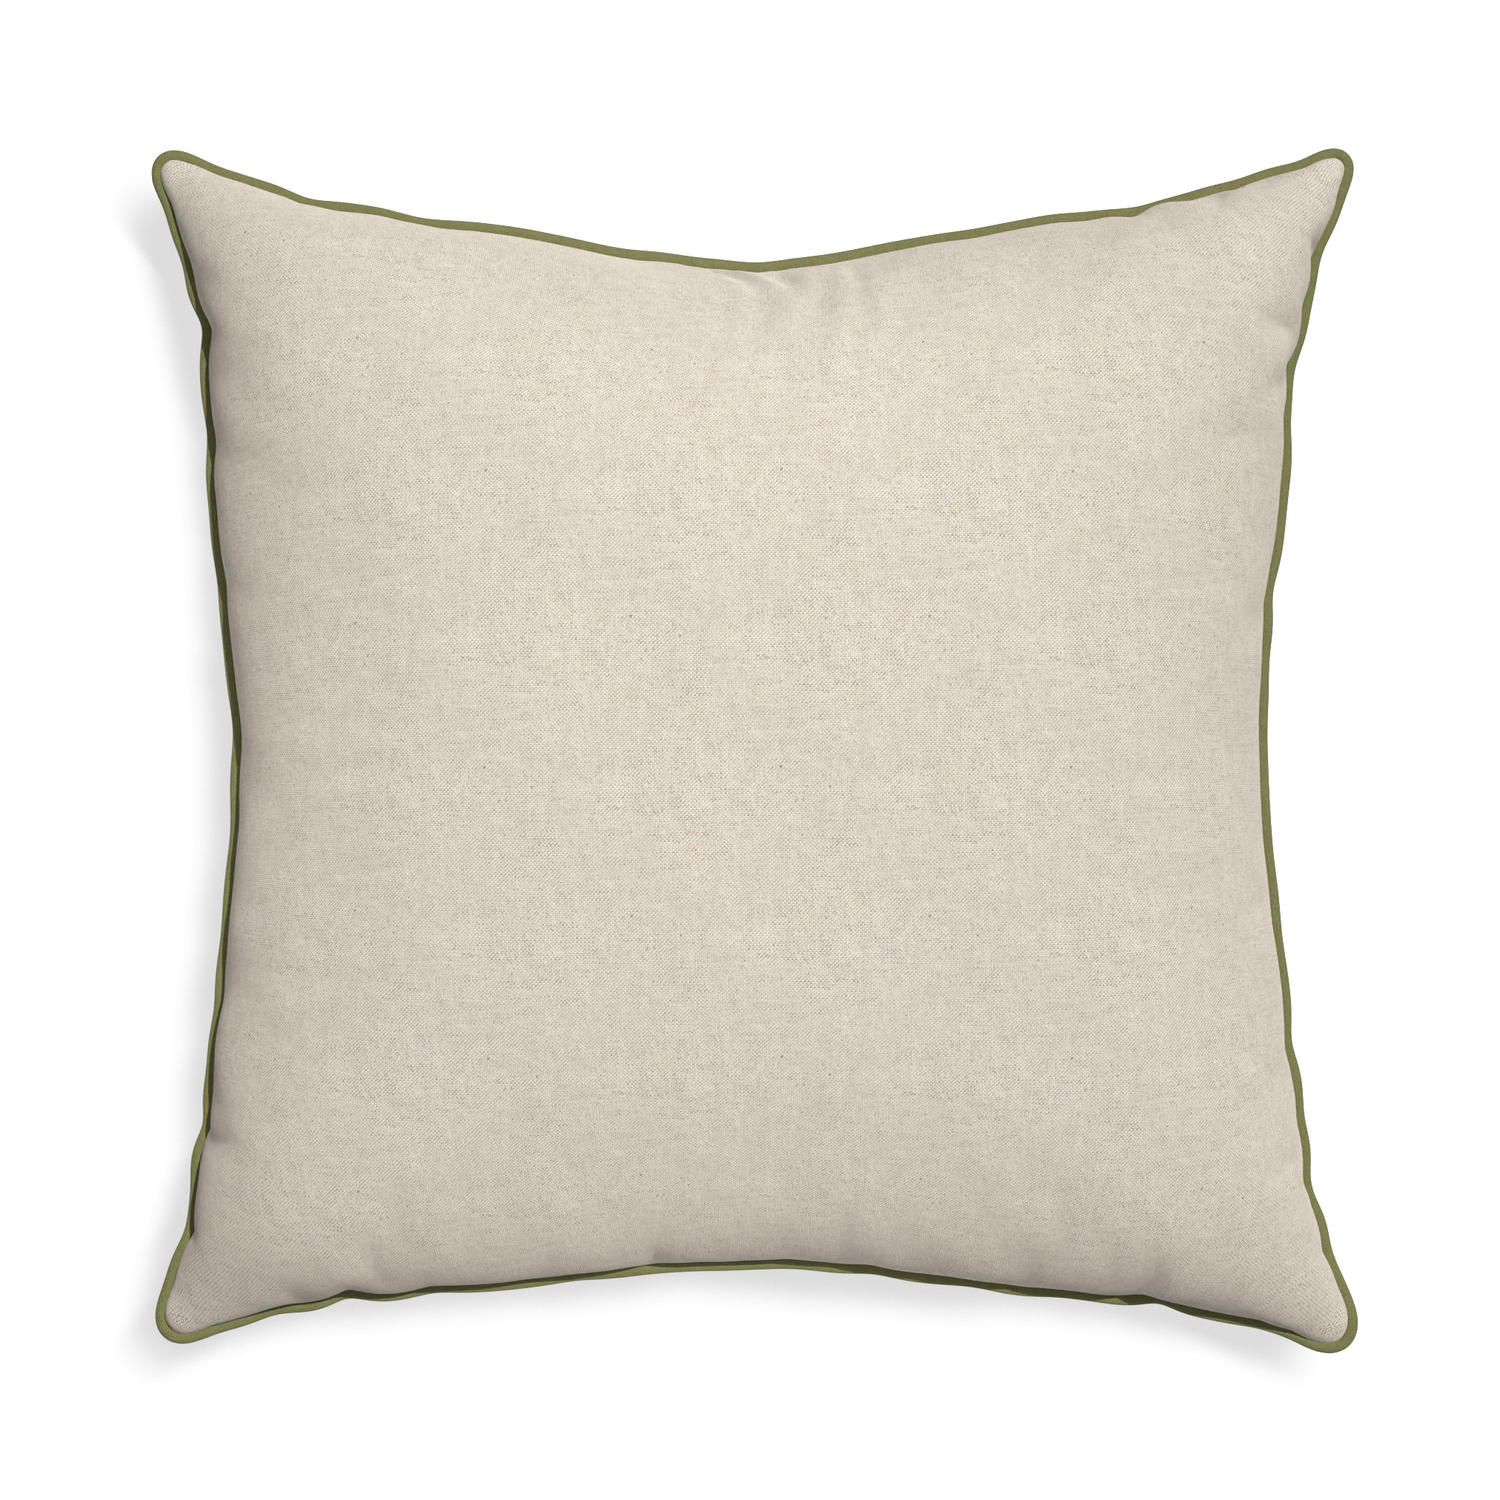 Euro-sham oat custom light brownpillow with moss piping on white background